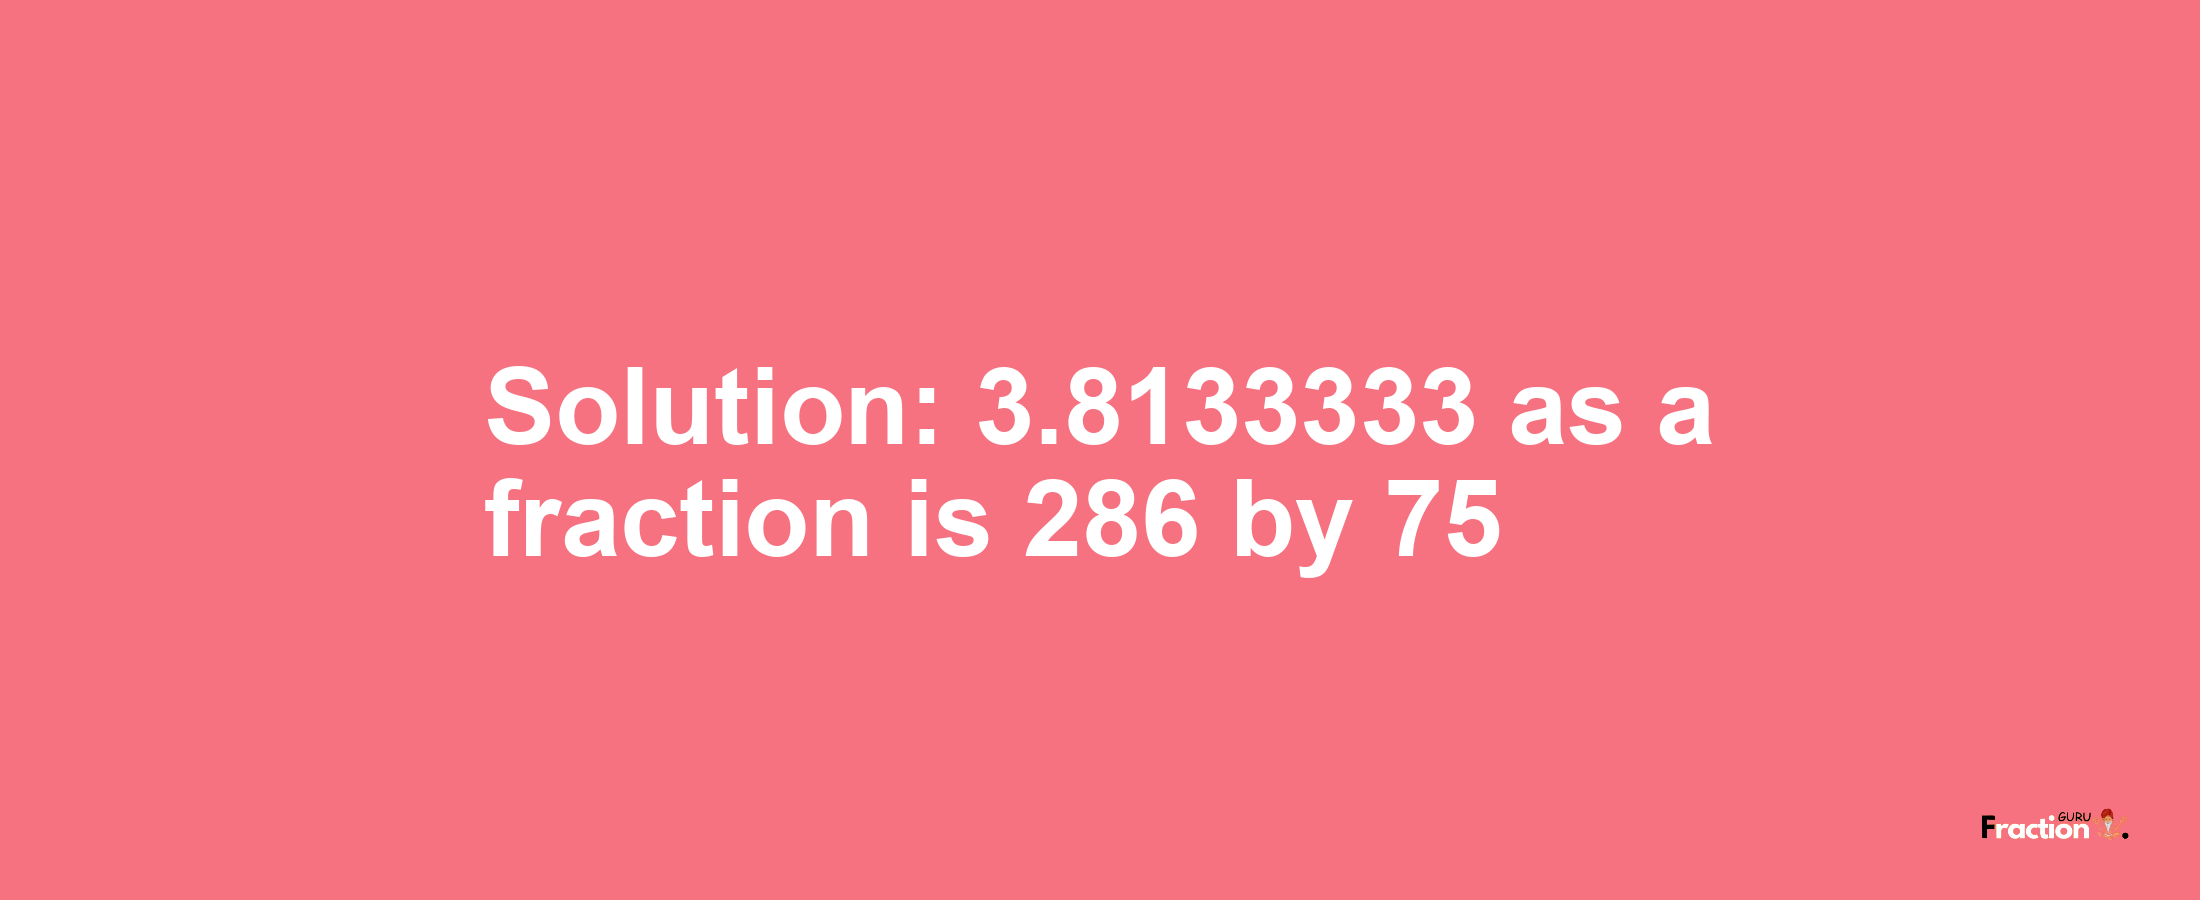 Solution:3.8133333 as a fraction is 286/75